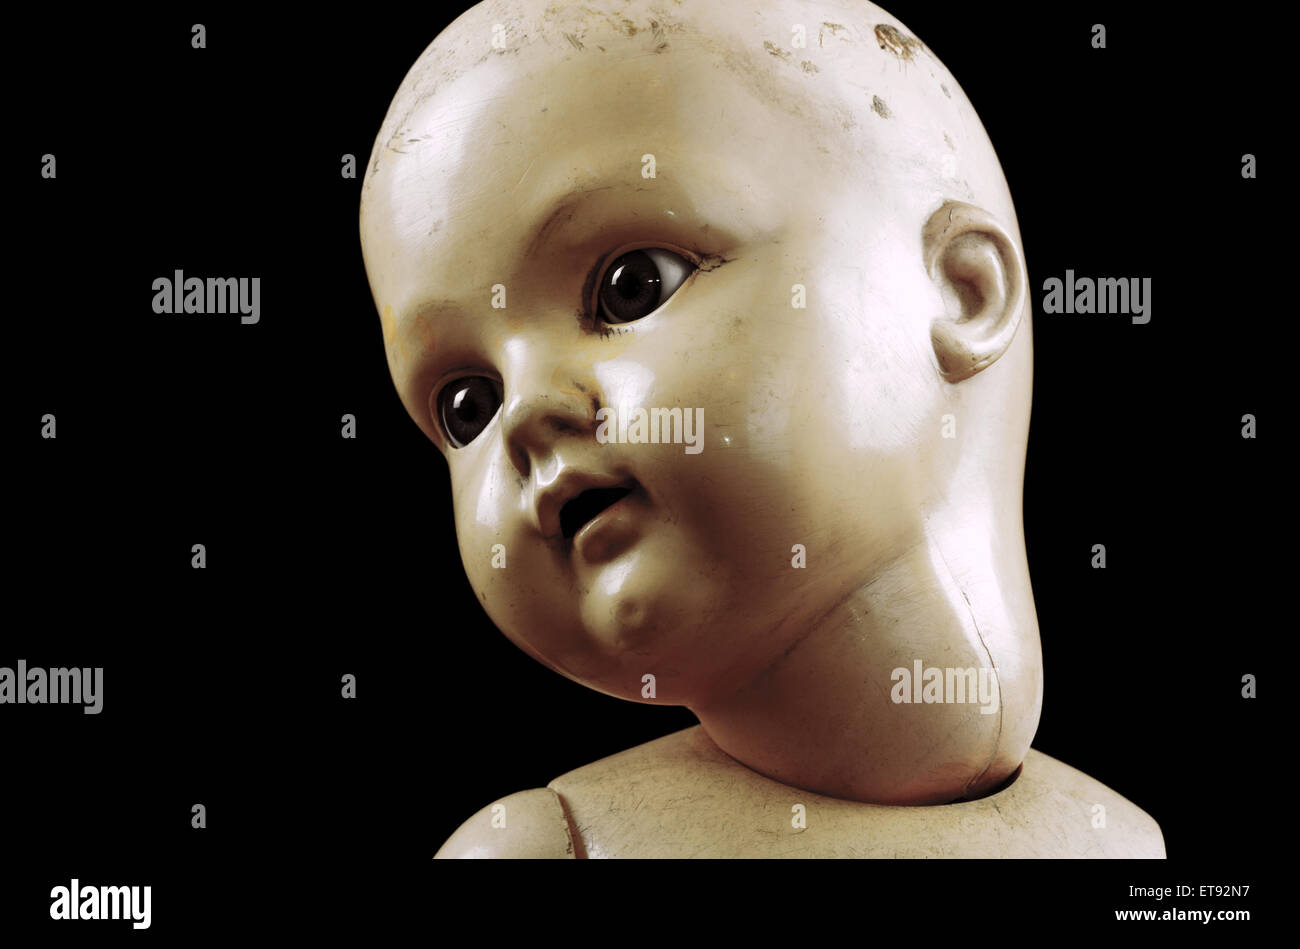 Creepy doll face. Clipping path included. Stock Photo